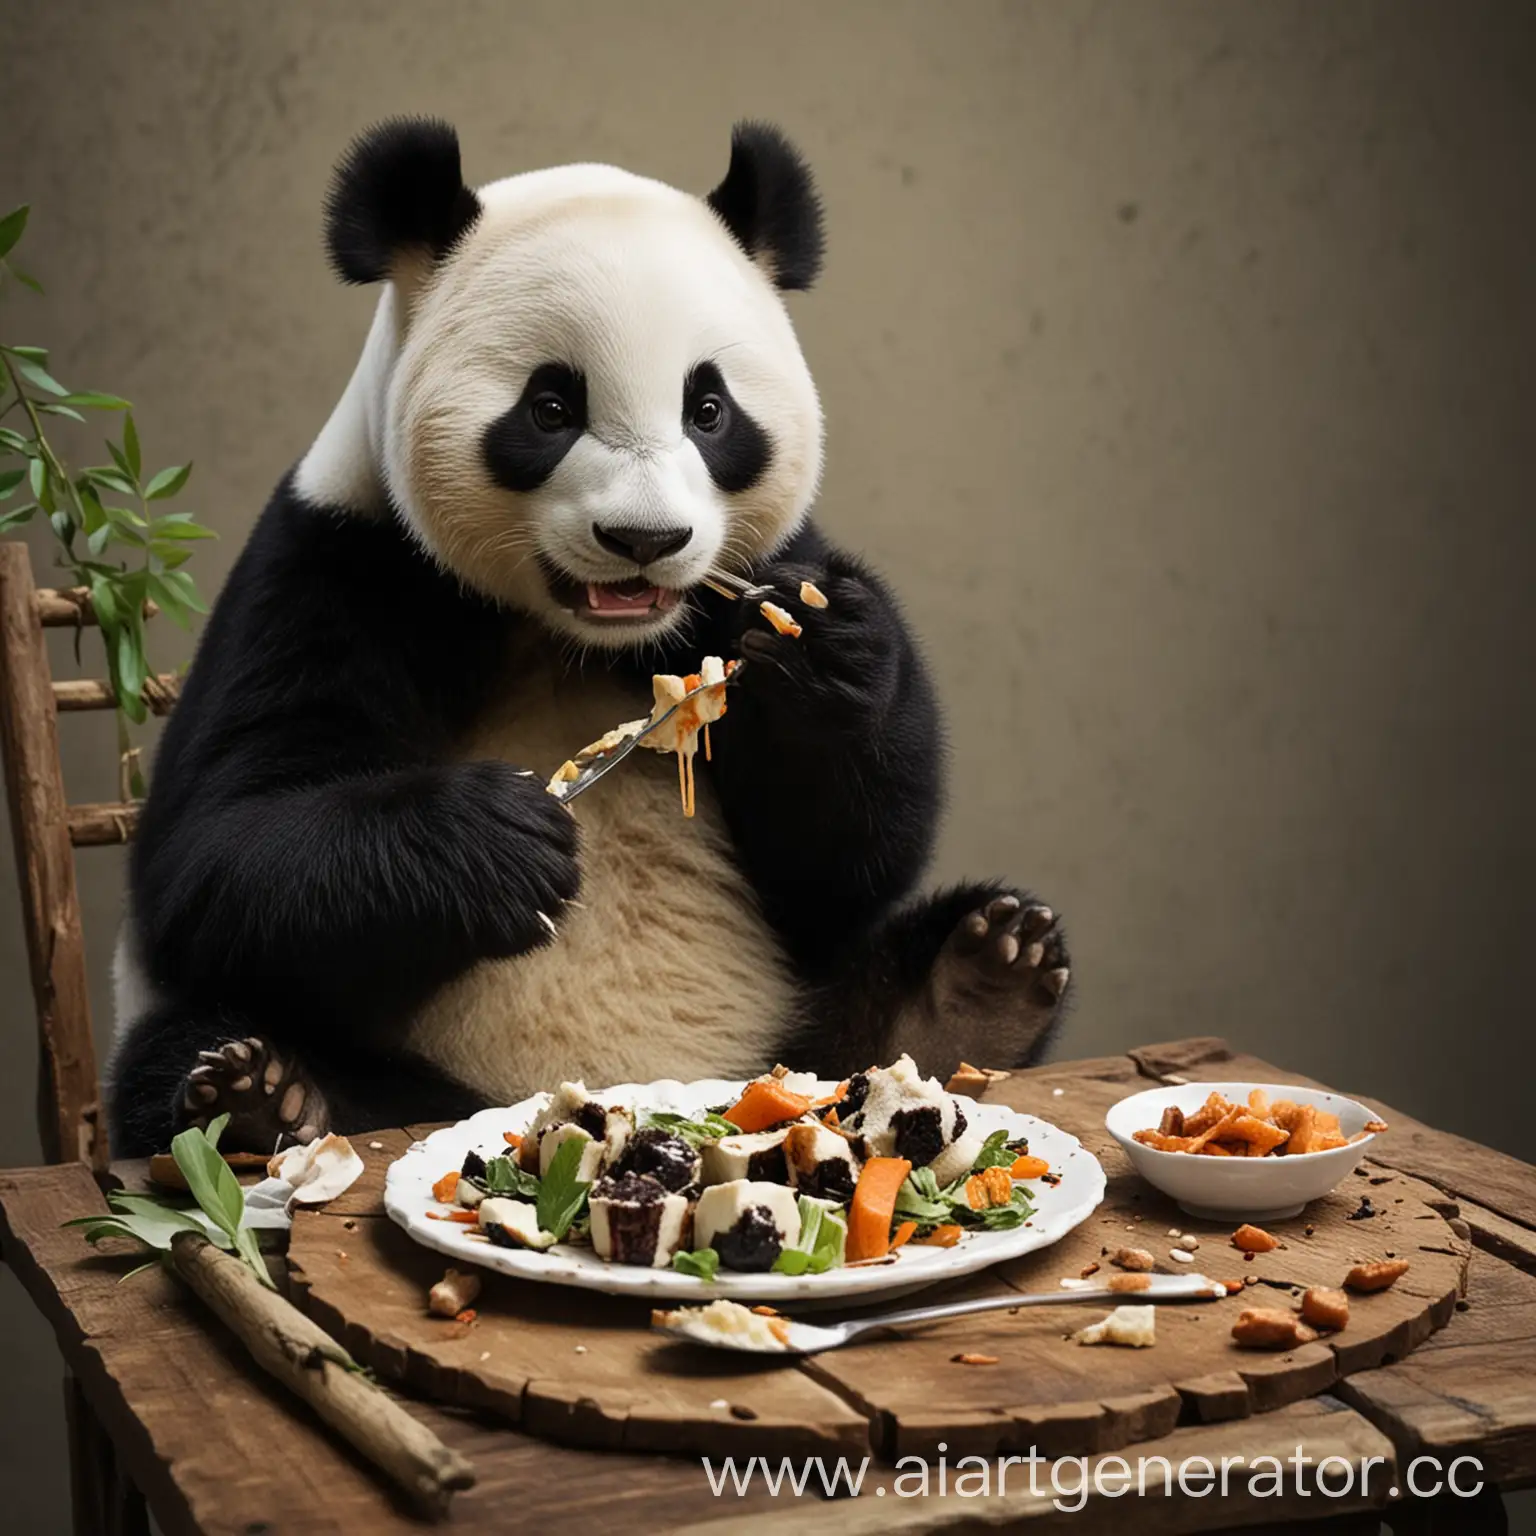 Panda-Eating-Bamboo-in-a-Serene-Forest-Setting